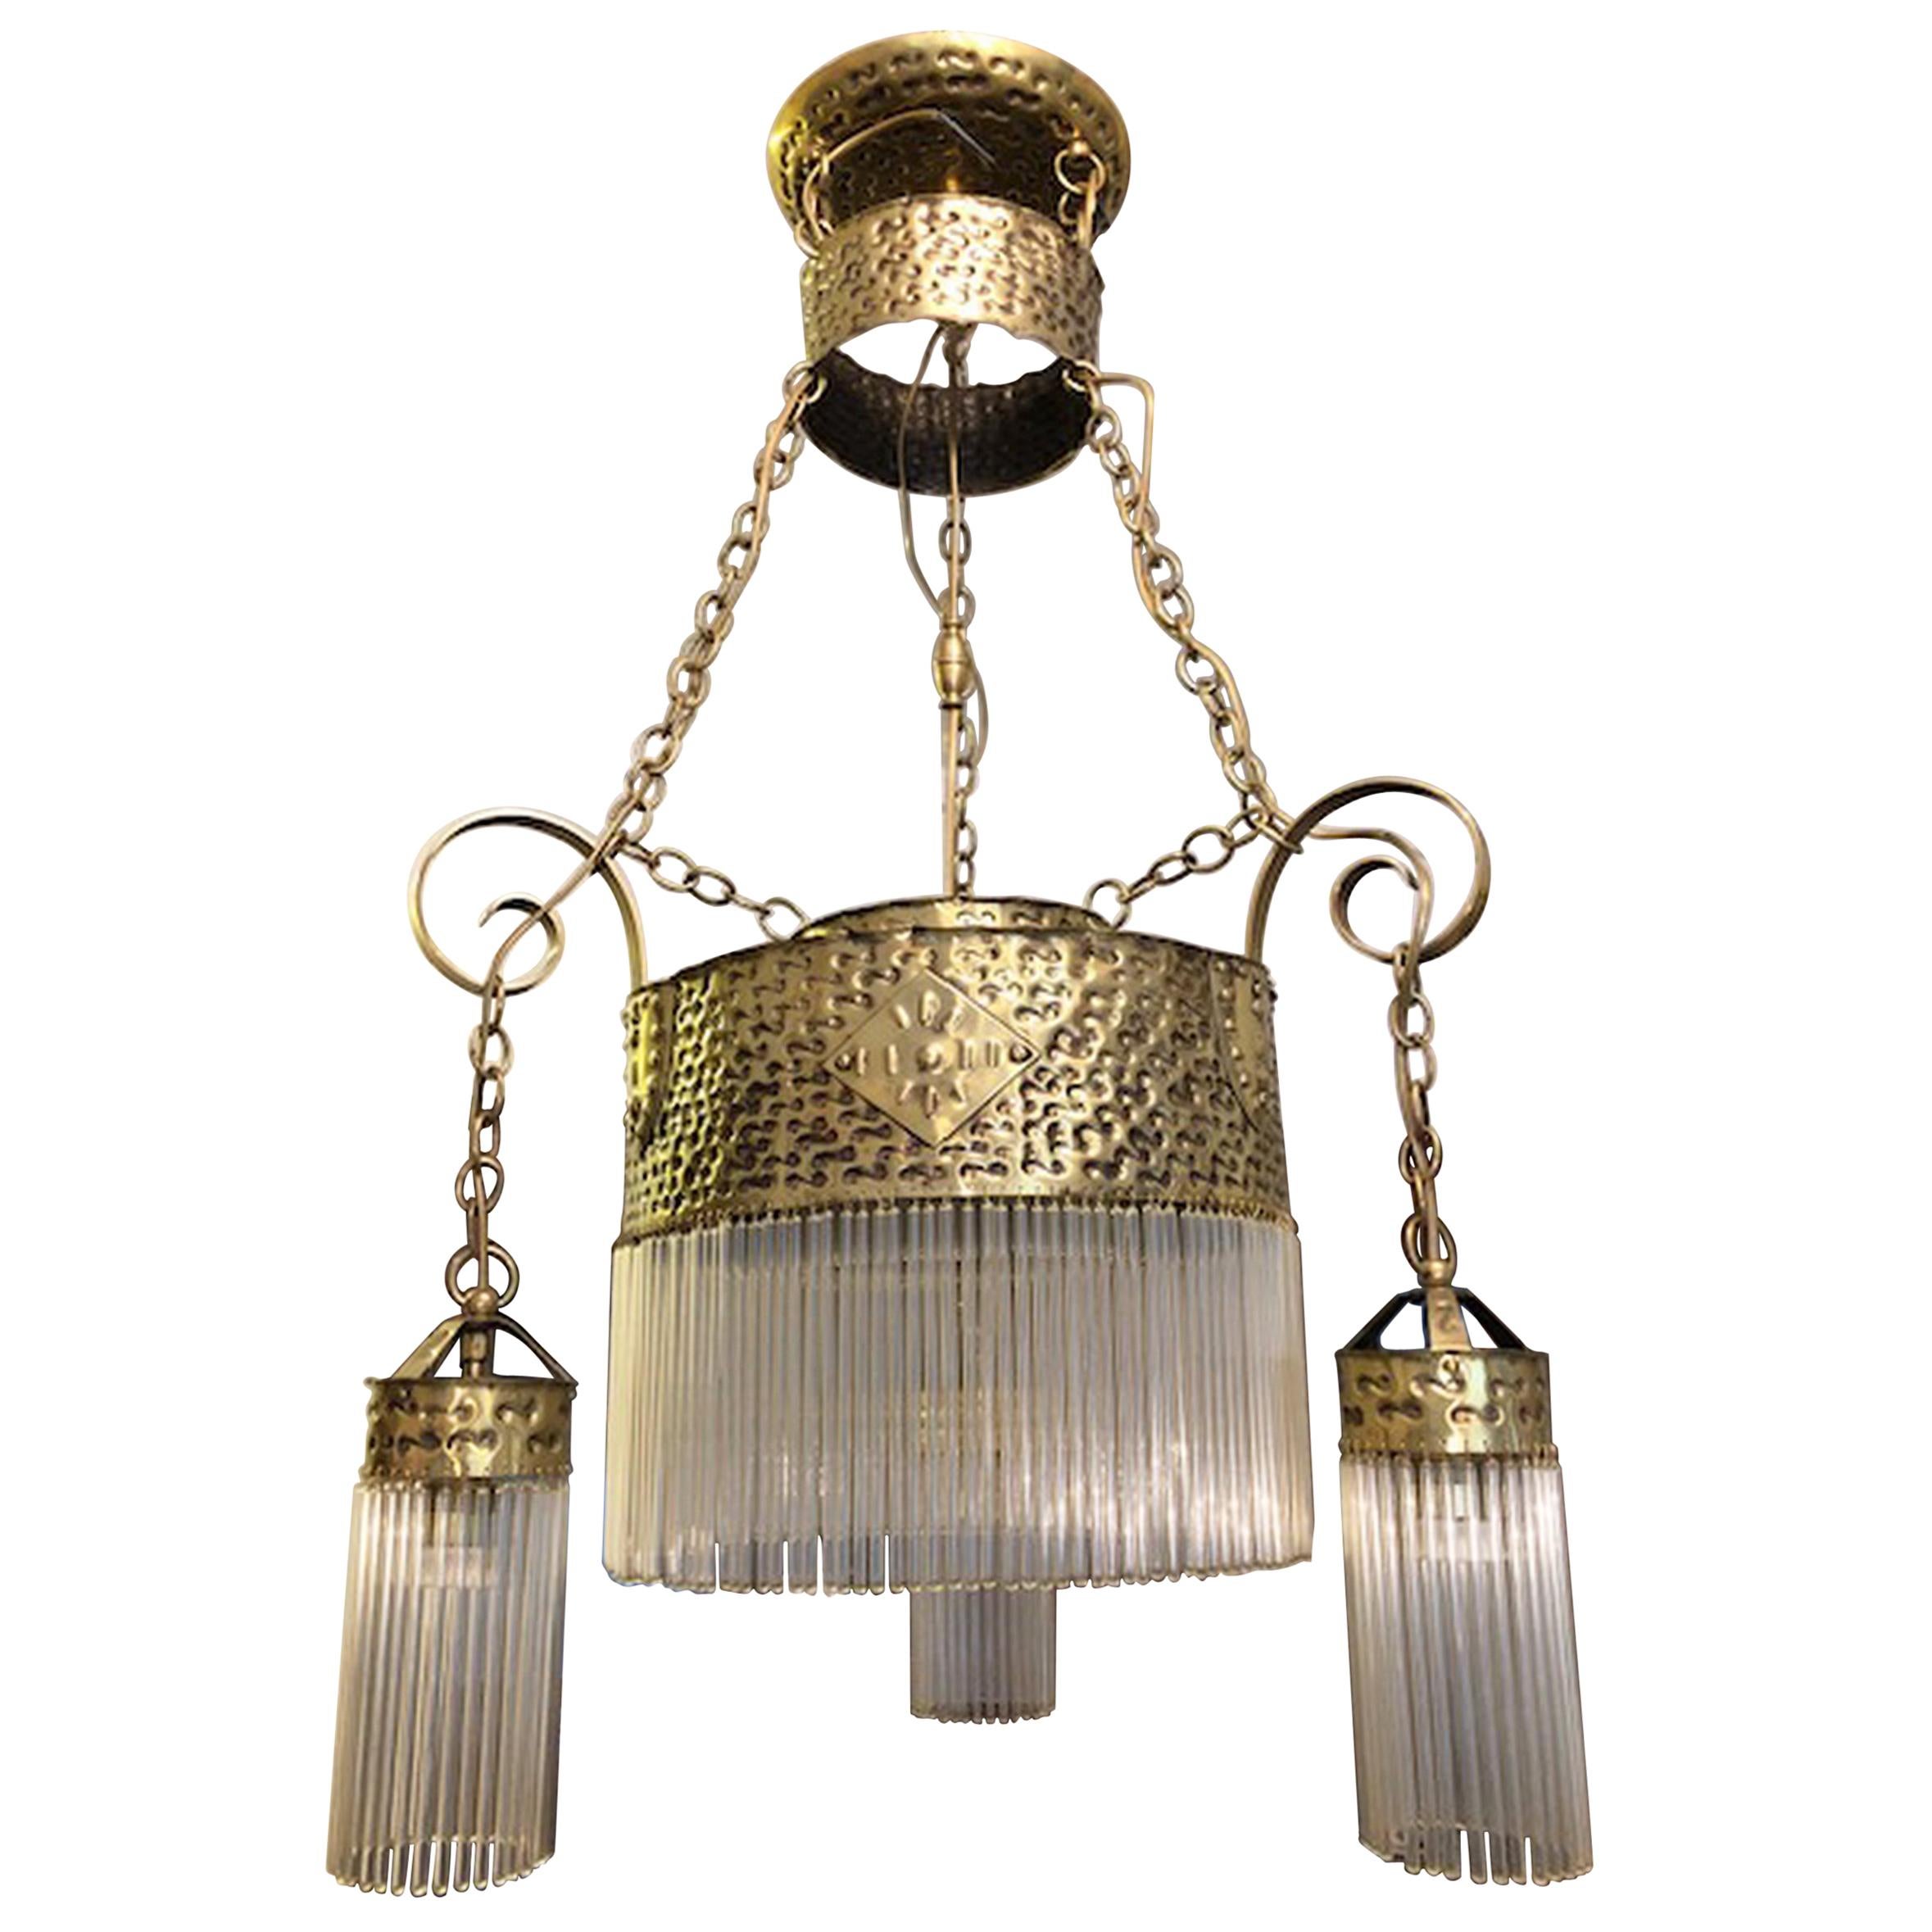 Original Art Deco Hanging Lamp Chandelier Brass with Glass Rods For Sale